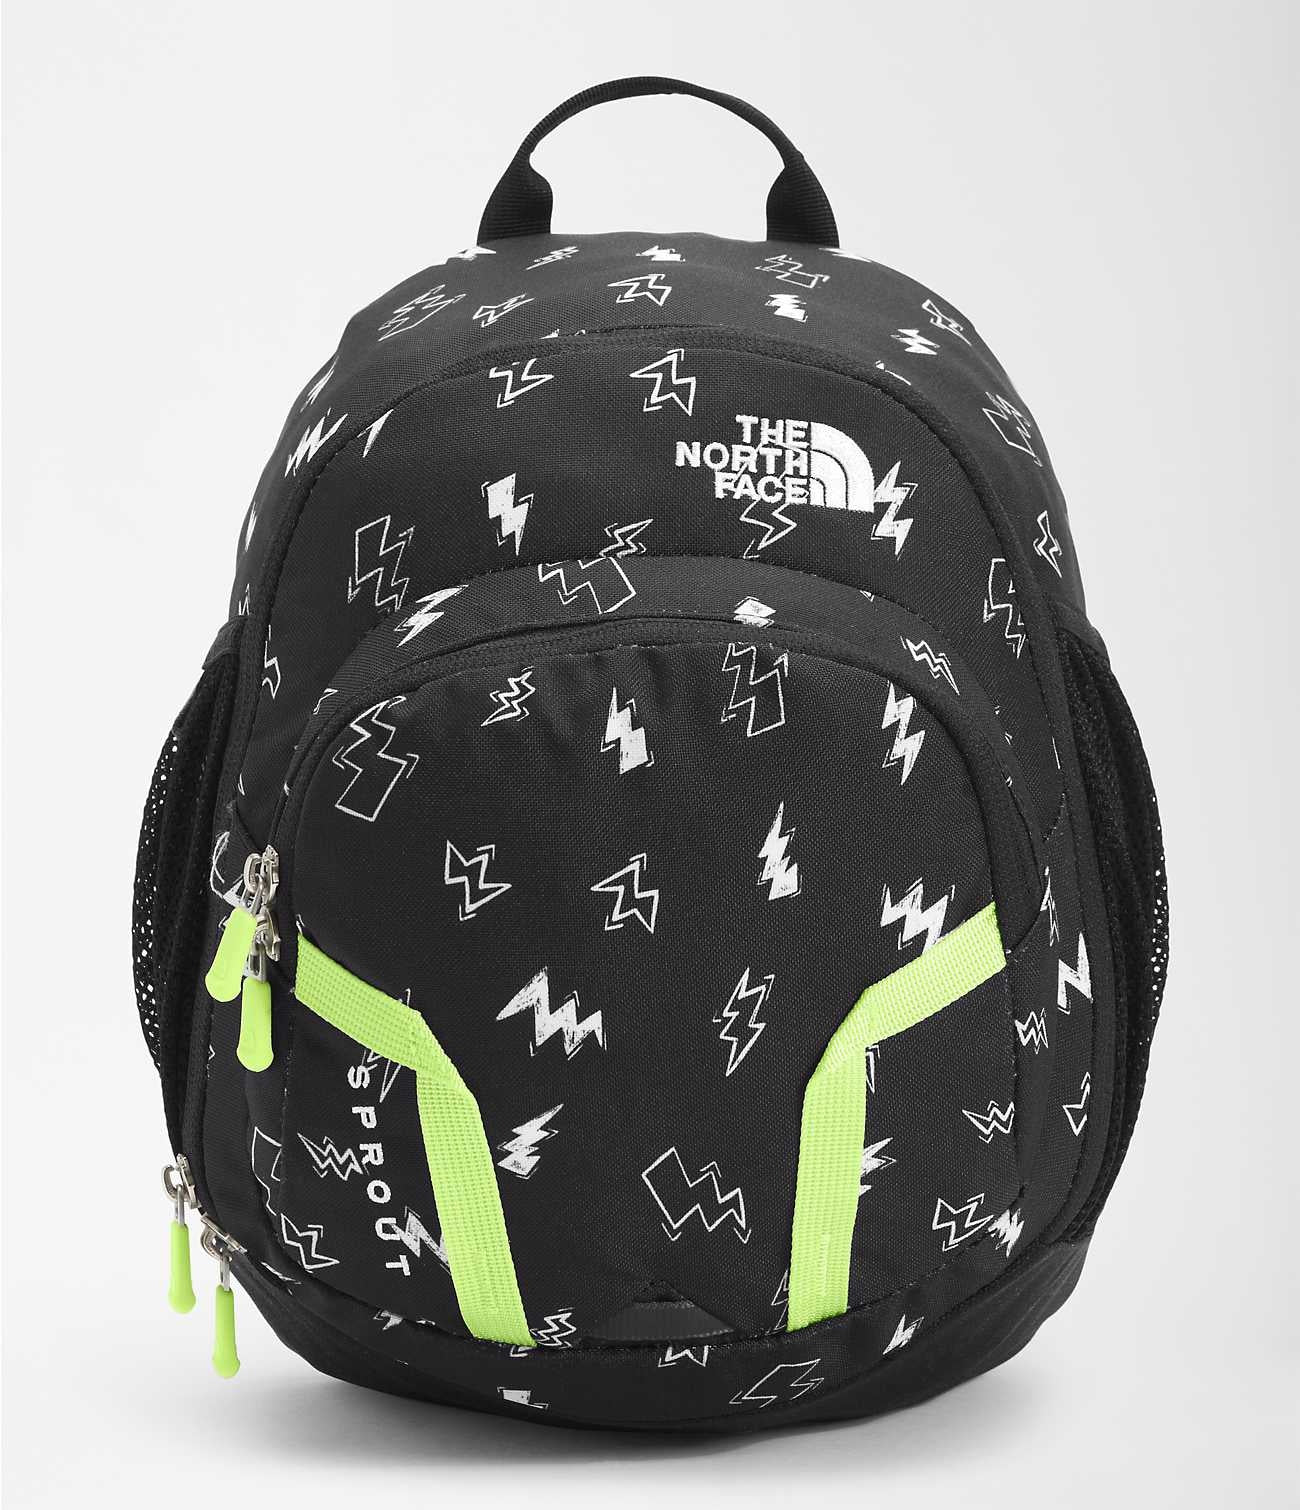 Youth Sprout Village Ski Hut The North Face Bags, softgoods accessories, Spring 2022